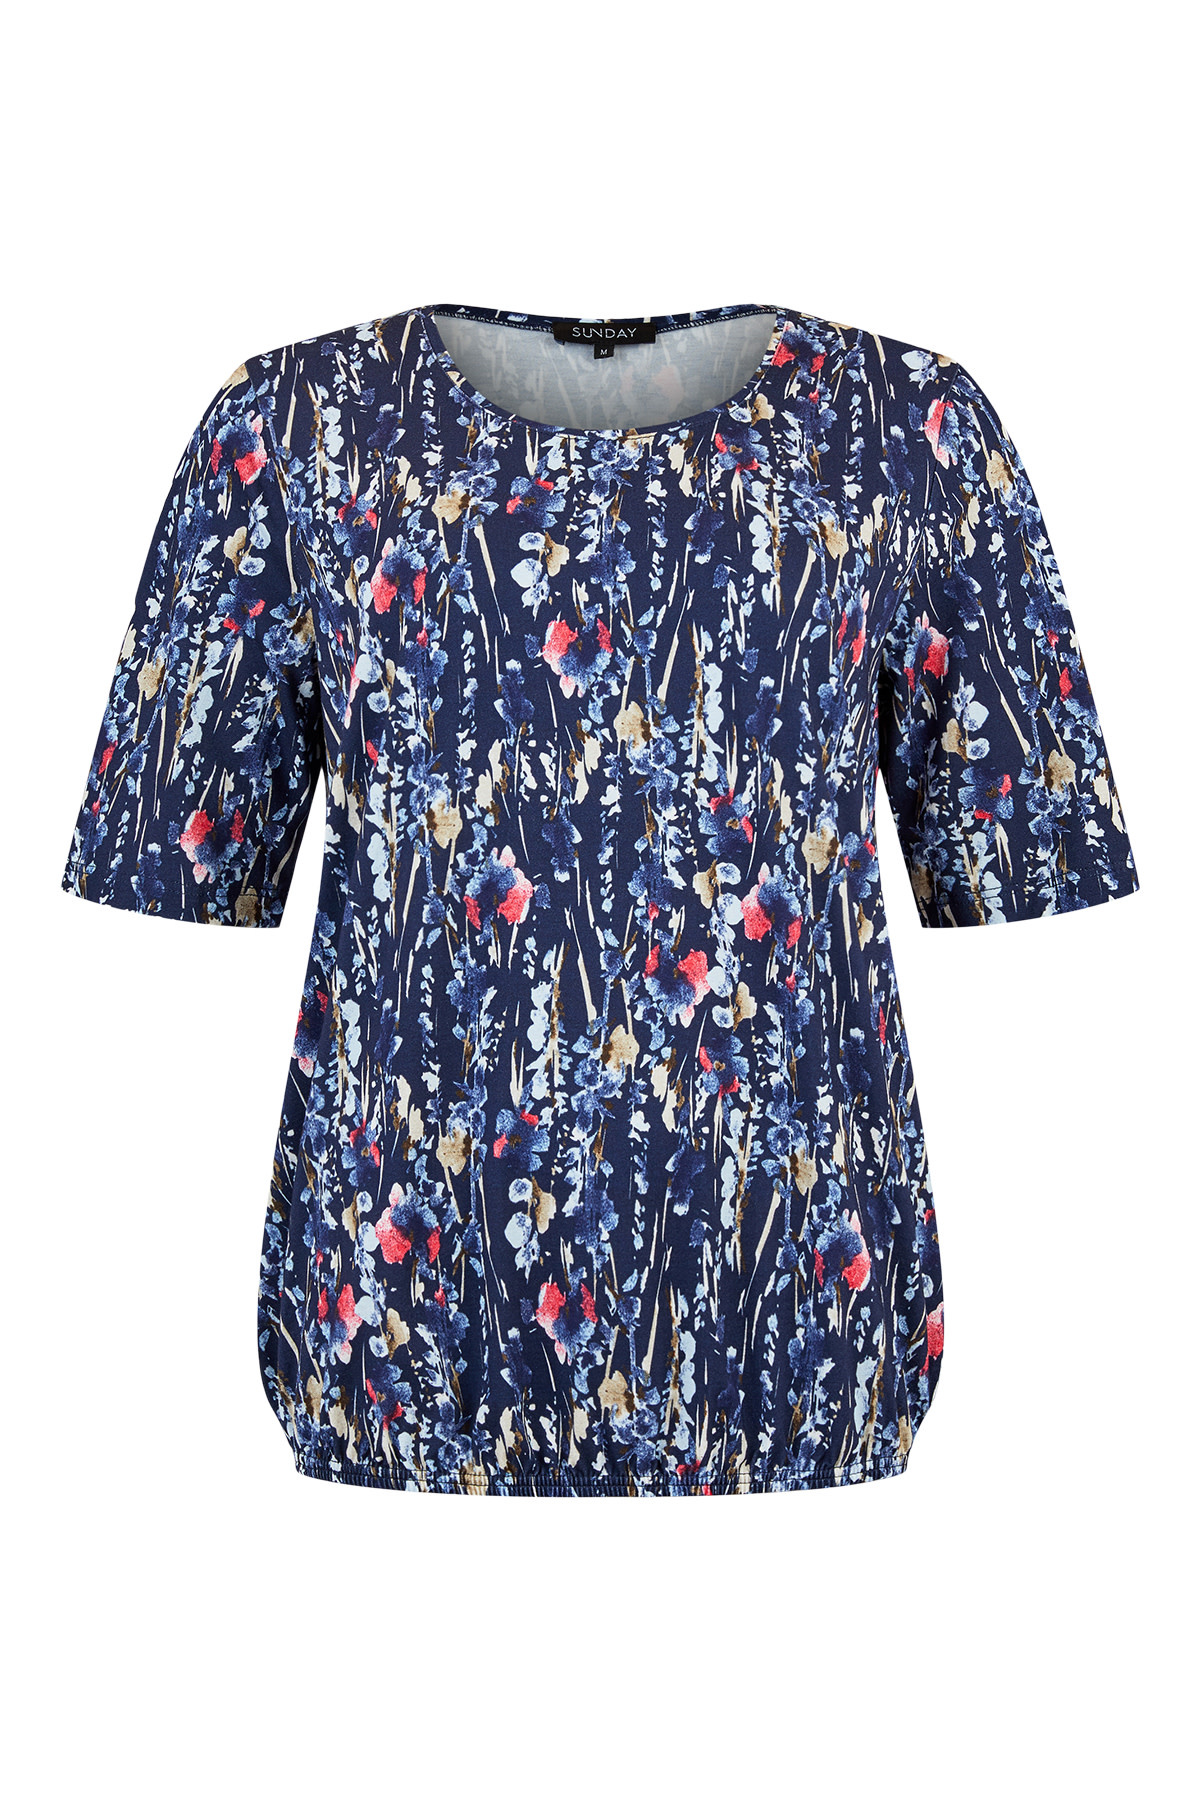 Abstract Floral Print Top with Elastic Hem